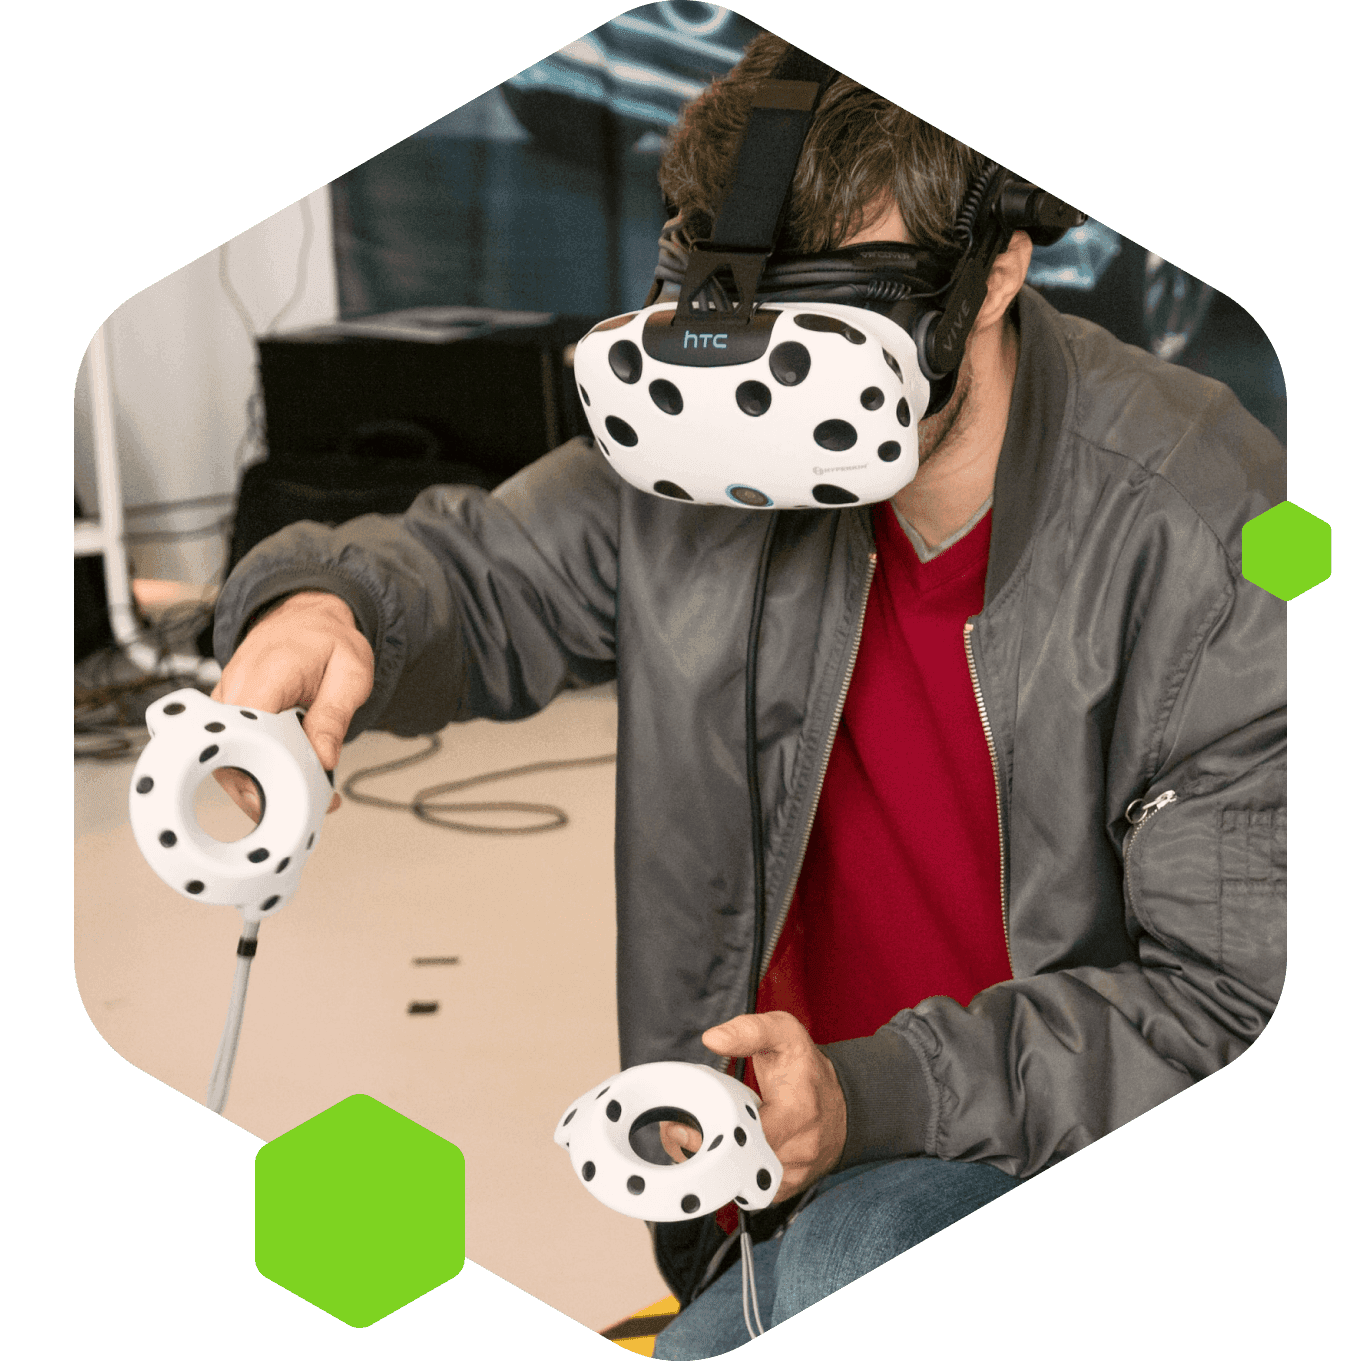 Virtual reality is the term used to describe a three-dimensional, computer generated environment which can be explored and interacted with by a person.